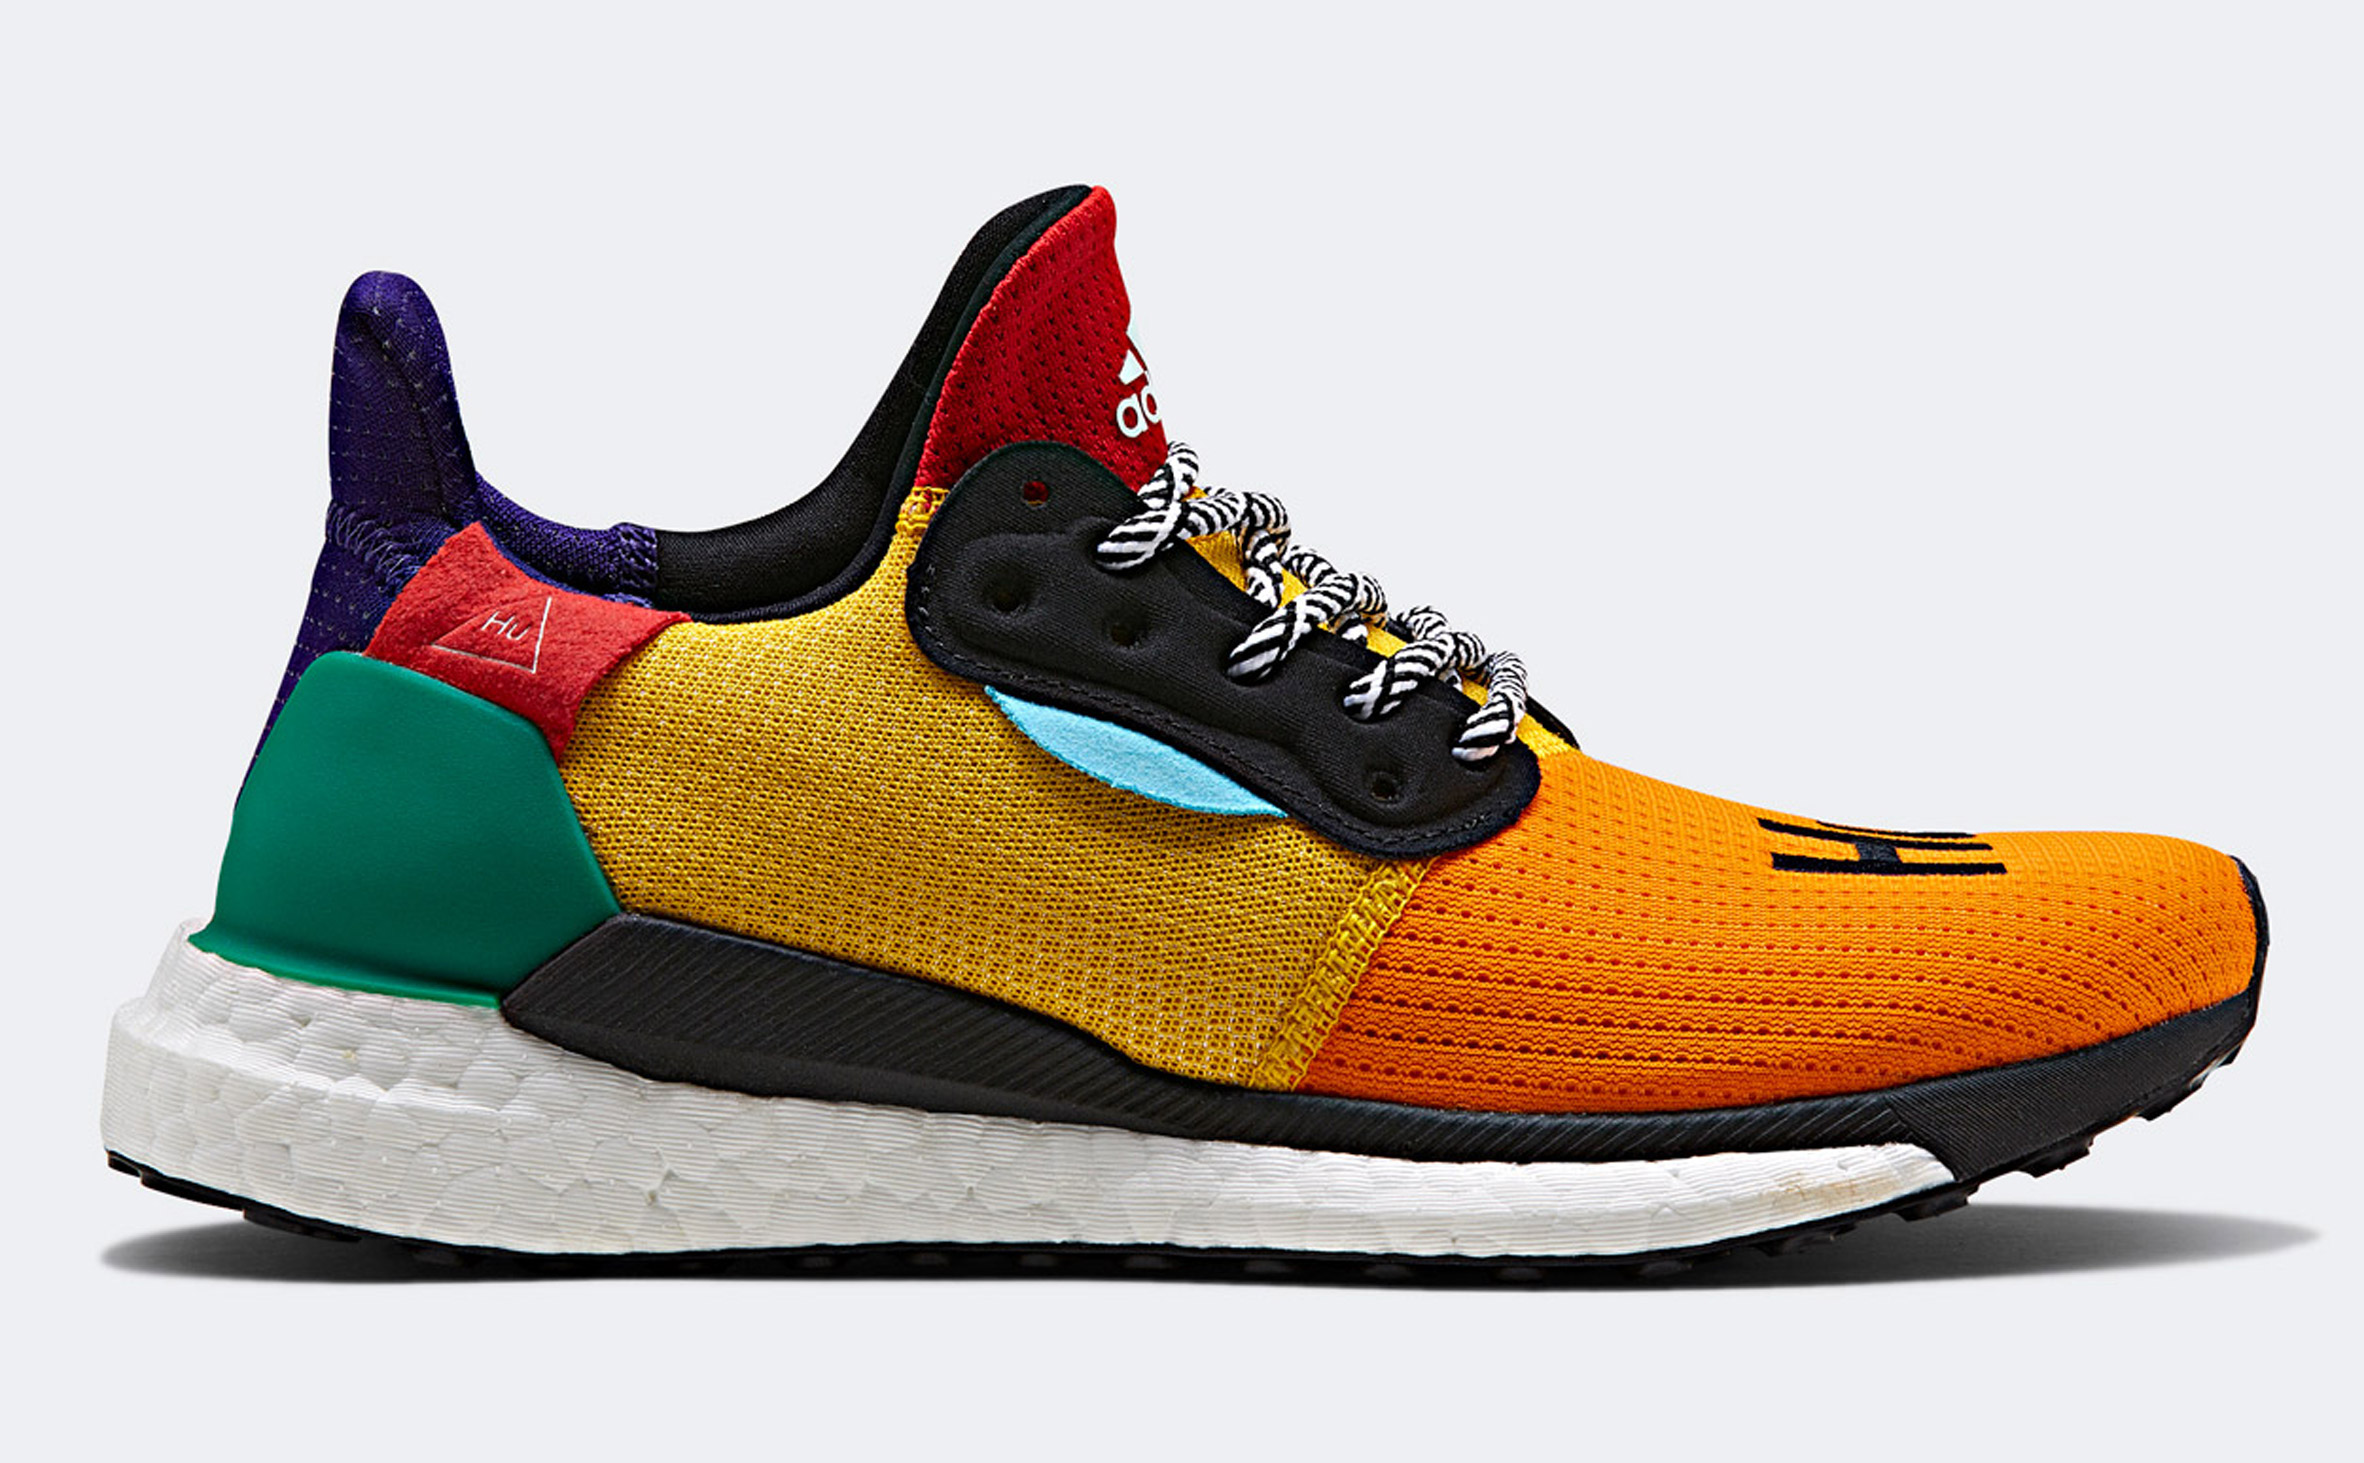 Pharrell Williams' adidas collection on East African flags